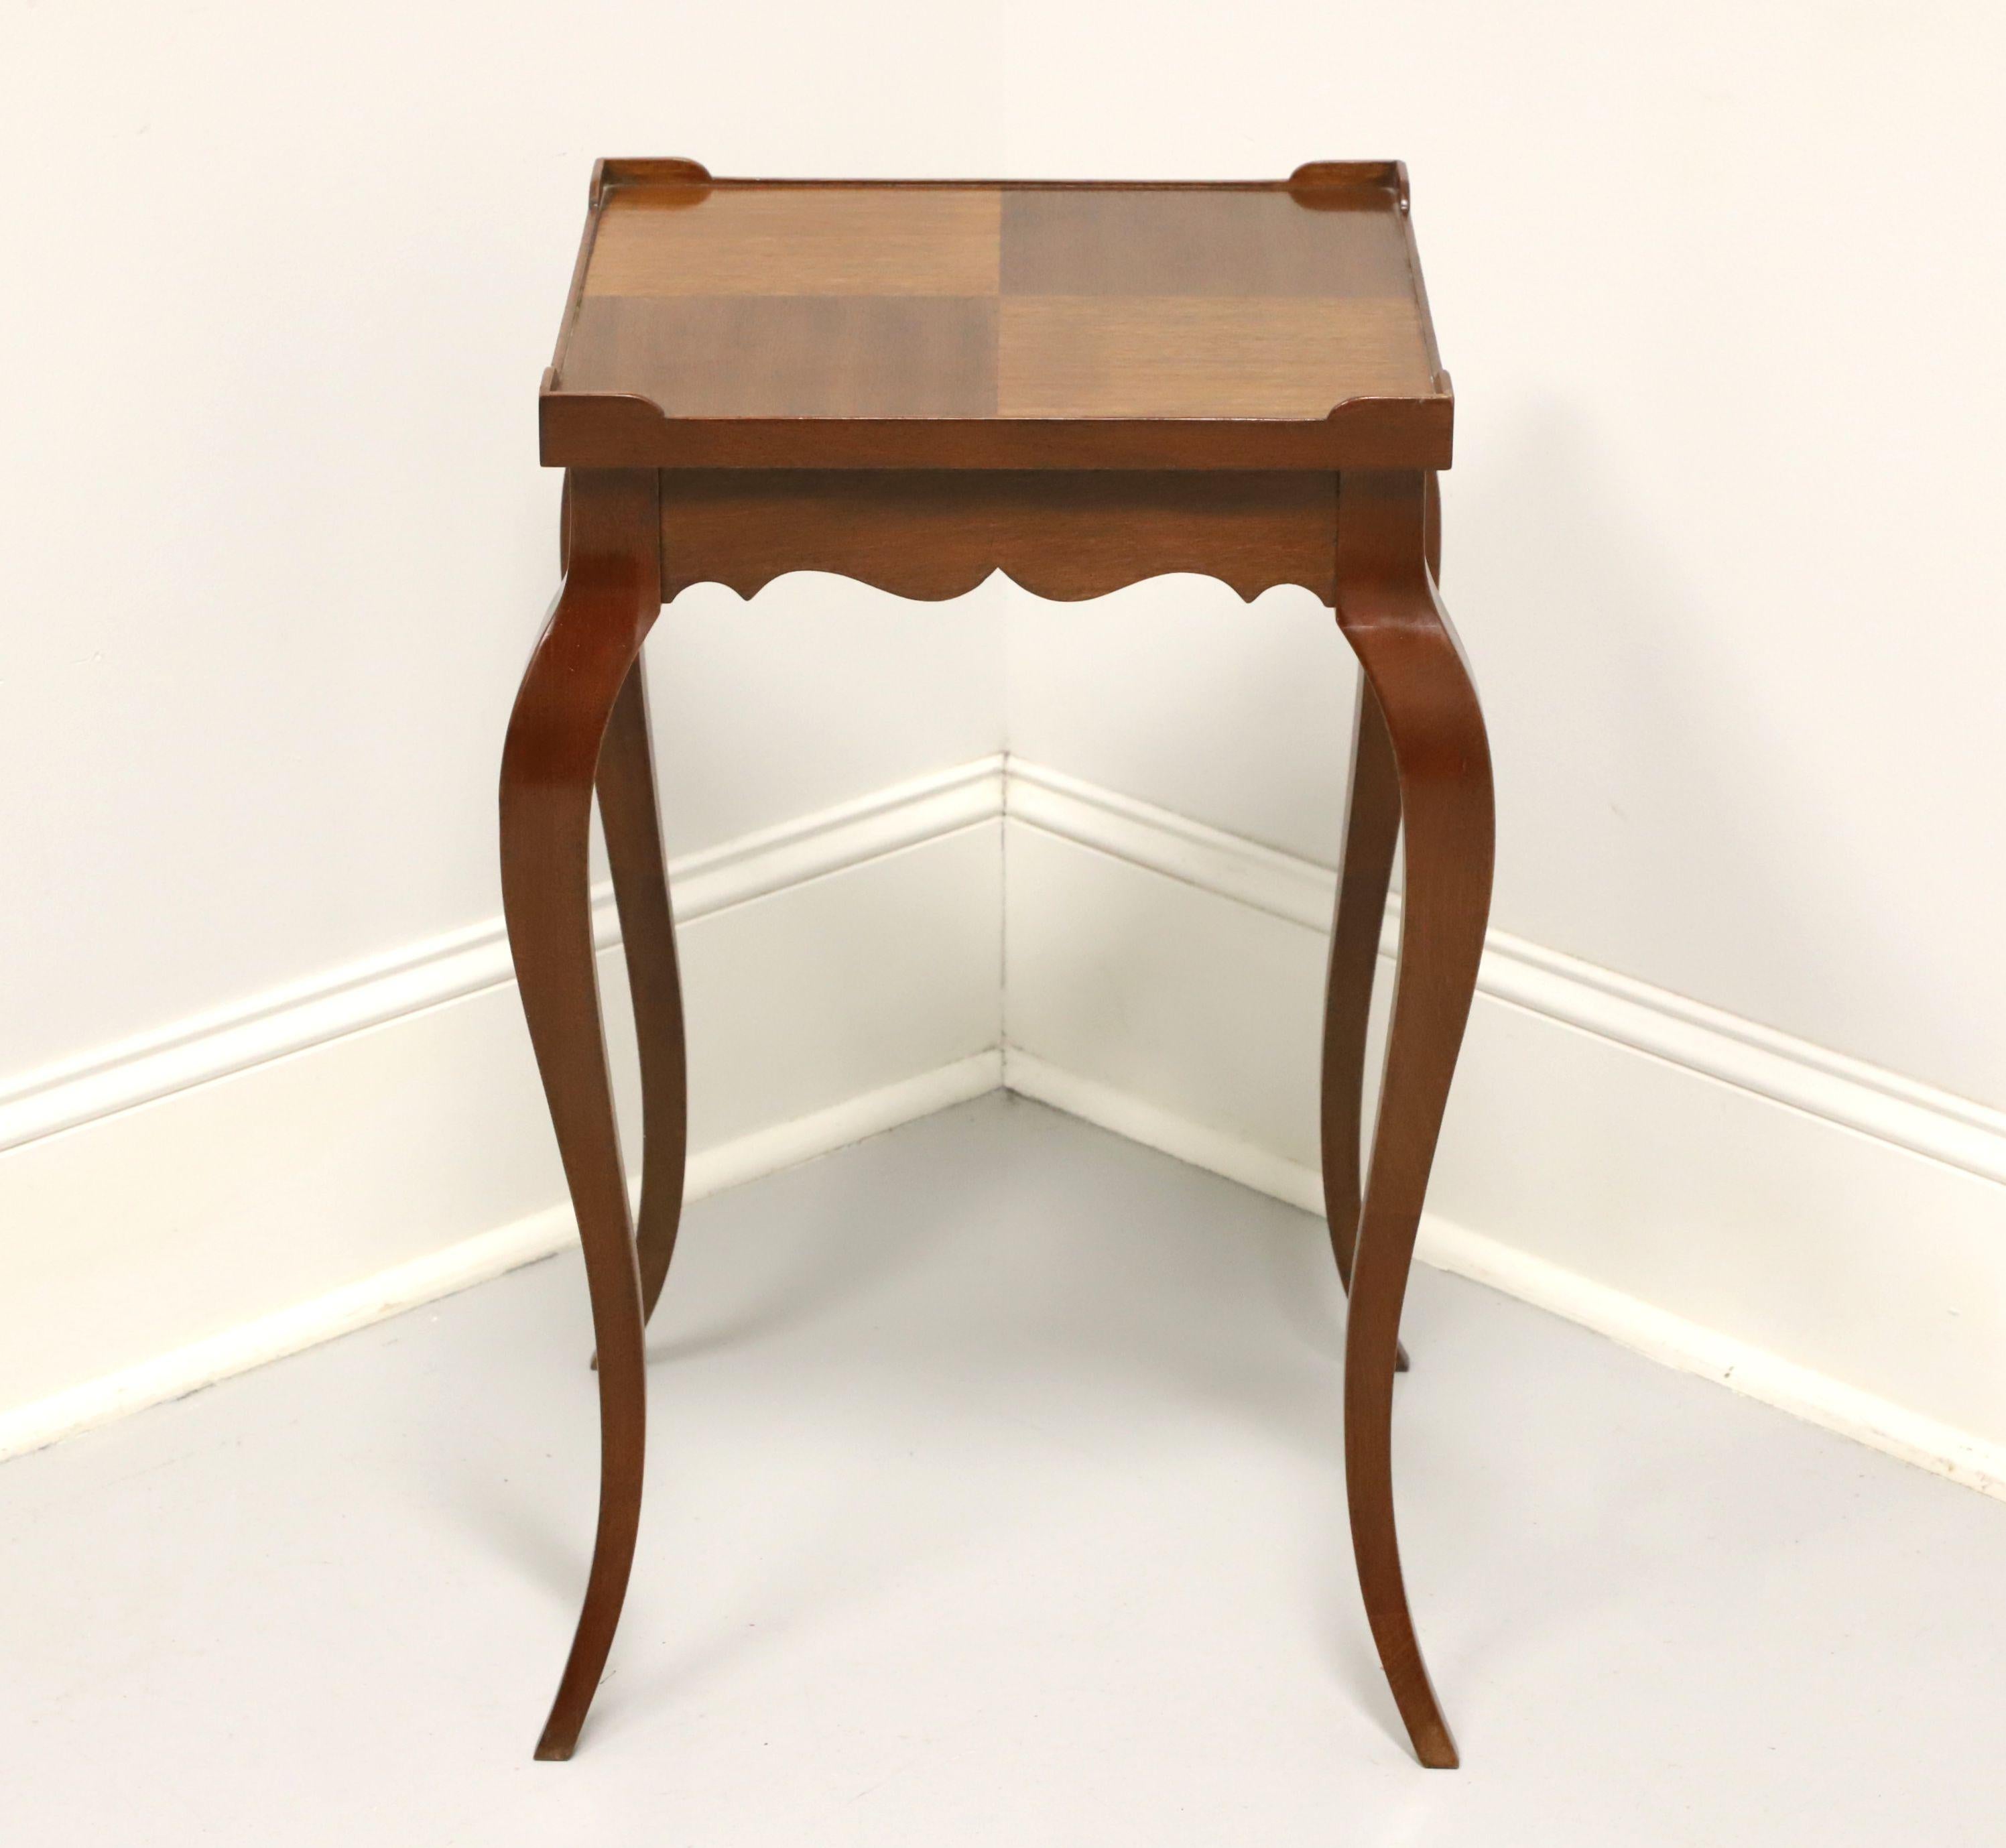 A French Louis XV style side table by Hekman Furniture, of Lexington, North Carolina, USA. Walnut with inlaid parquetry to top, carved apron and cabriole legs. Features the inlaid parquetry top with raised corners forming a partial gallery. Made in